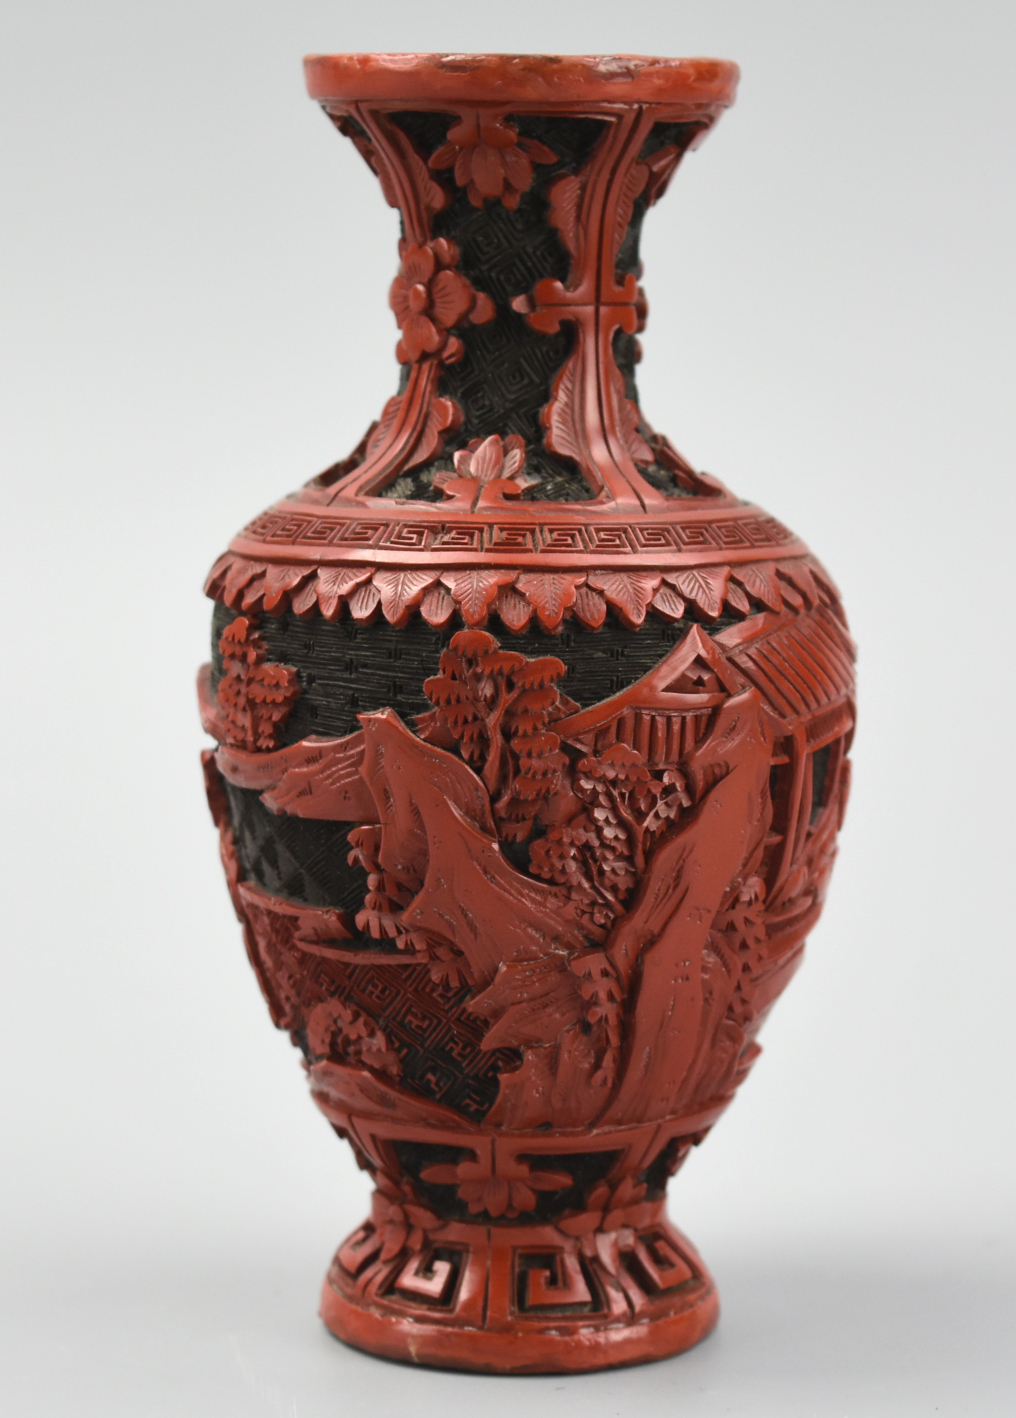 SMALL CHINESE LACQUERWARE VASE QING 2cf822